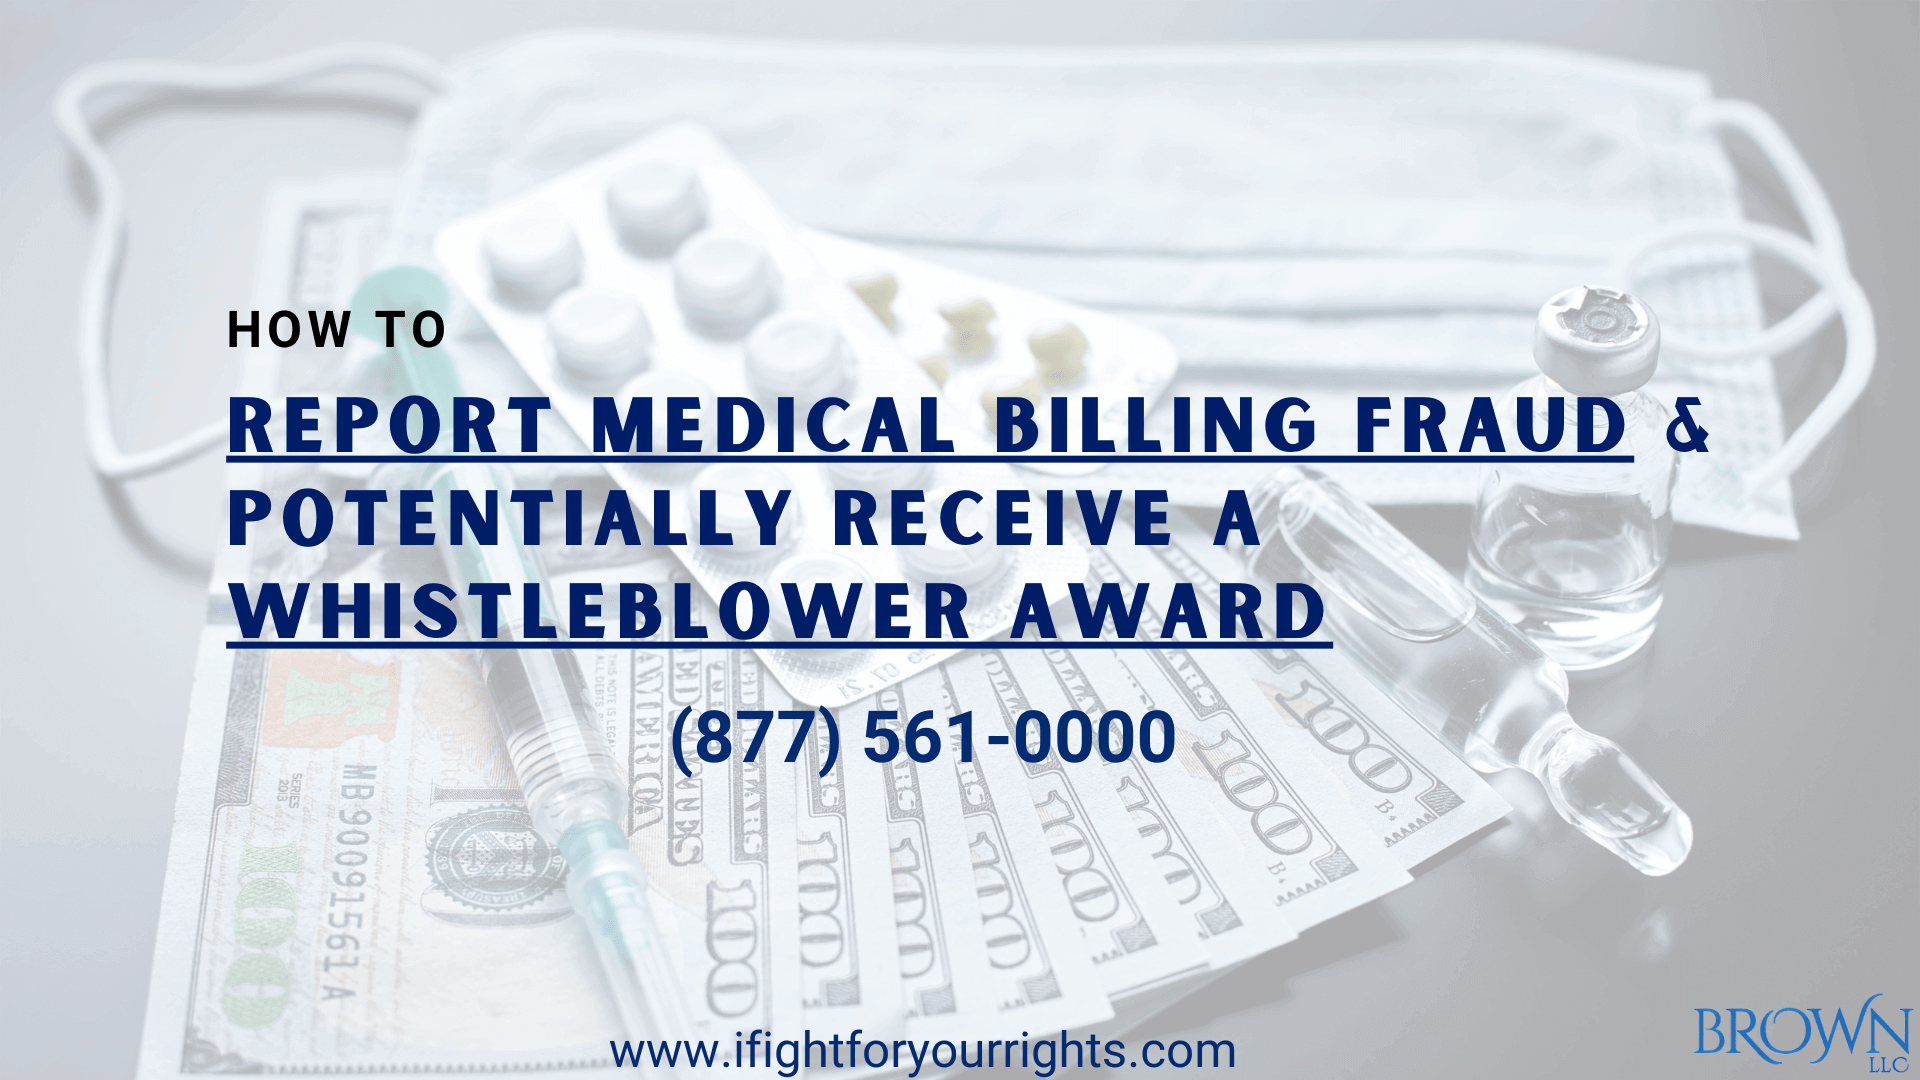 How to report medical billing fraud?